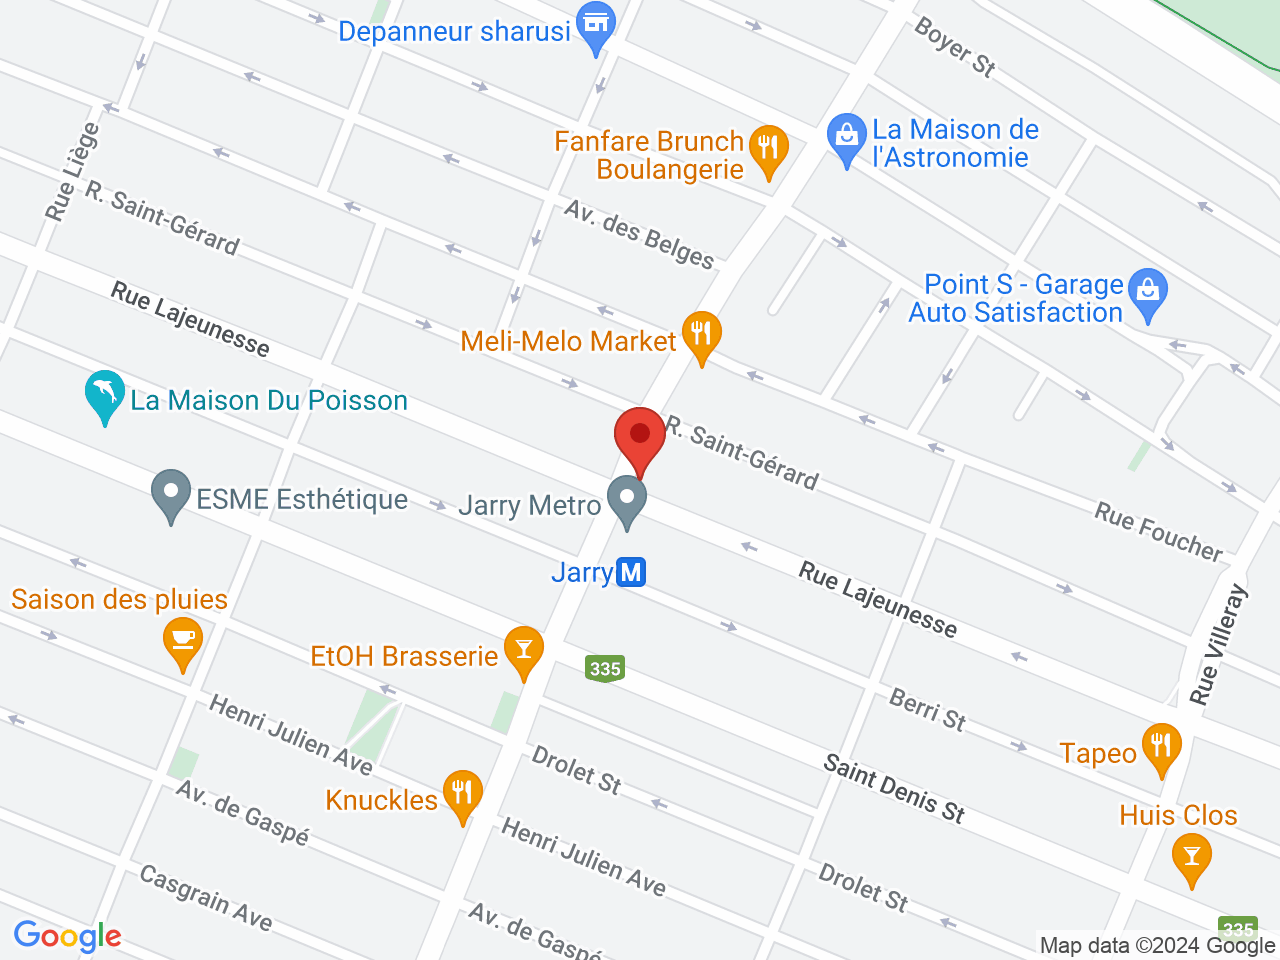 Street map for SQDC Montreal - Metro Jarry, 8095 rue Lajeunesse, Montreal QC